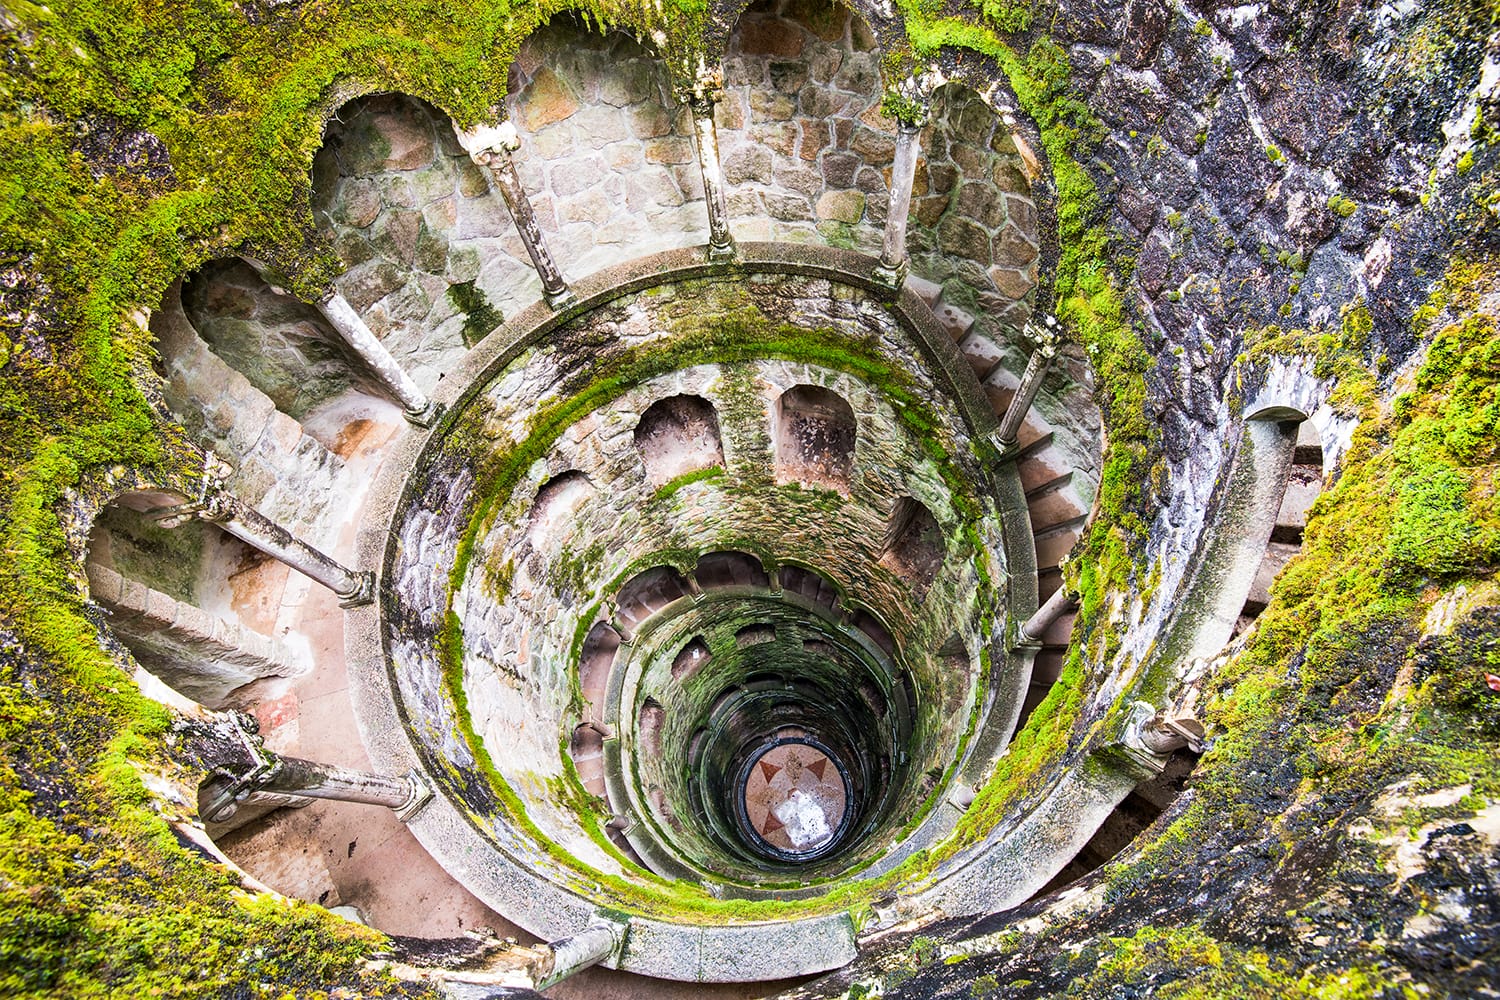 Initiation Well at the Regaleira Palace (Quinta da Regaleira), Sintra, Portugal